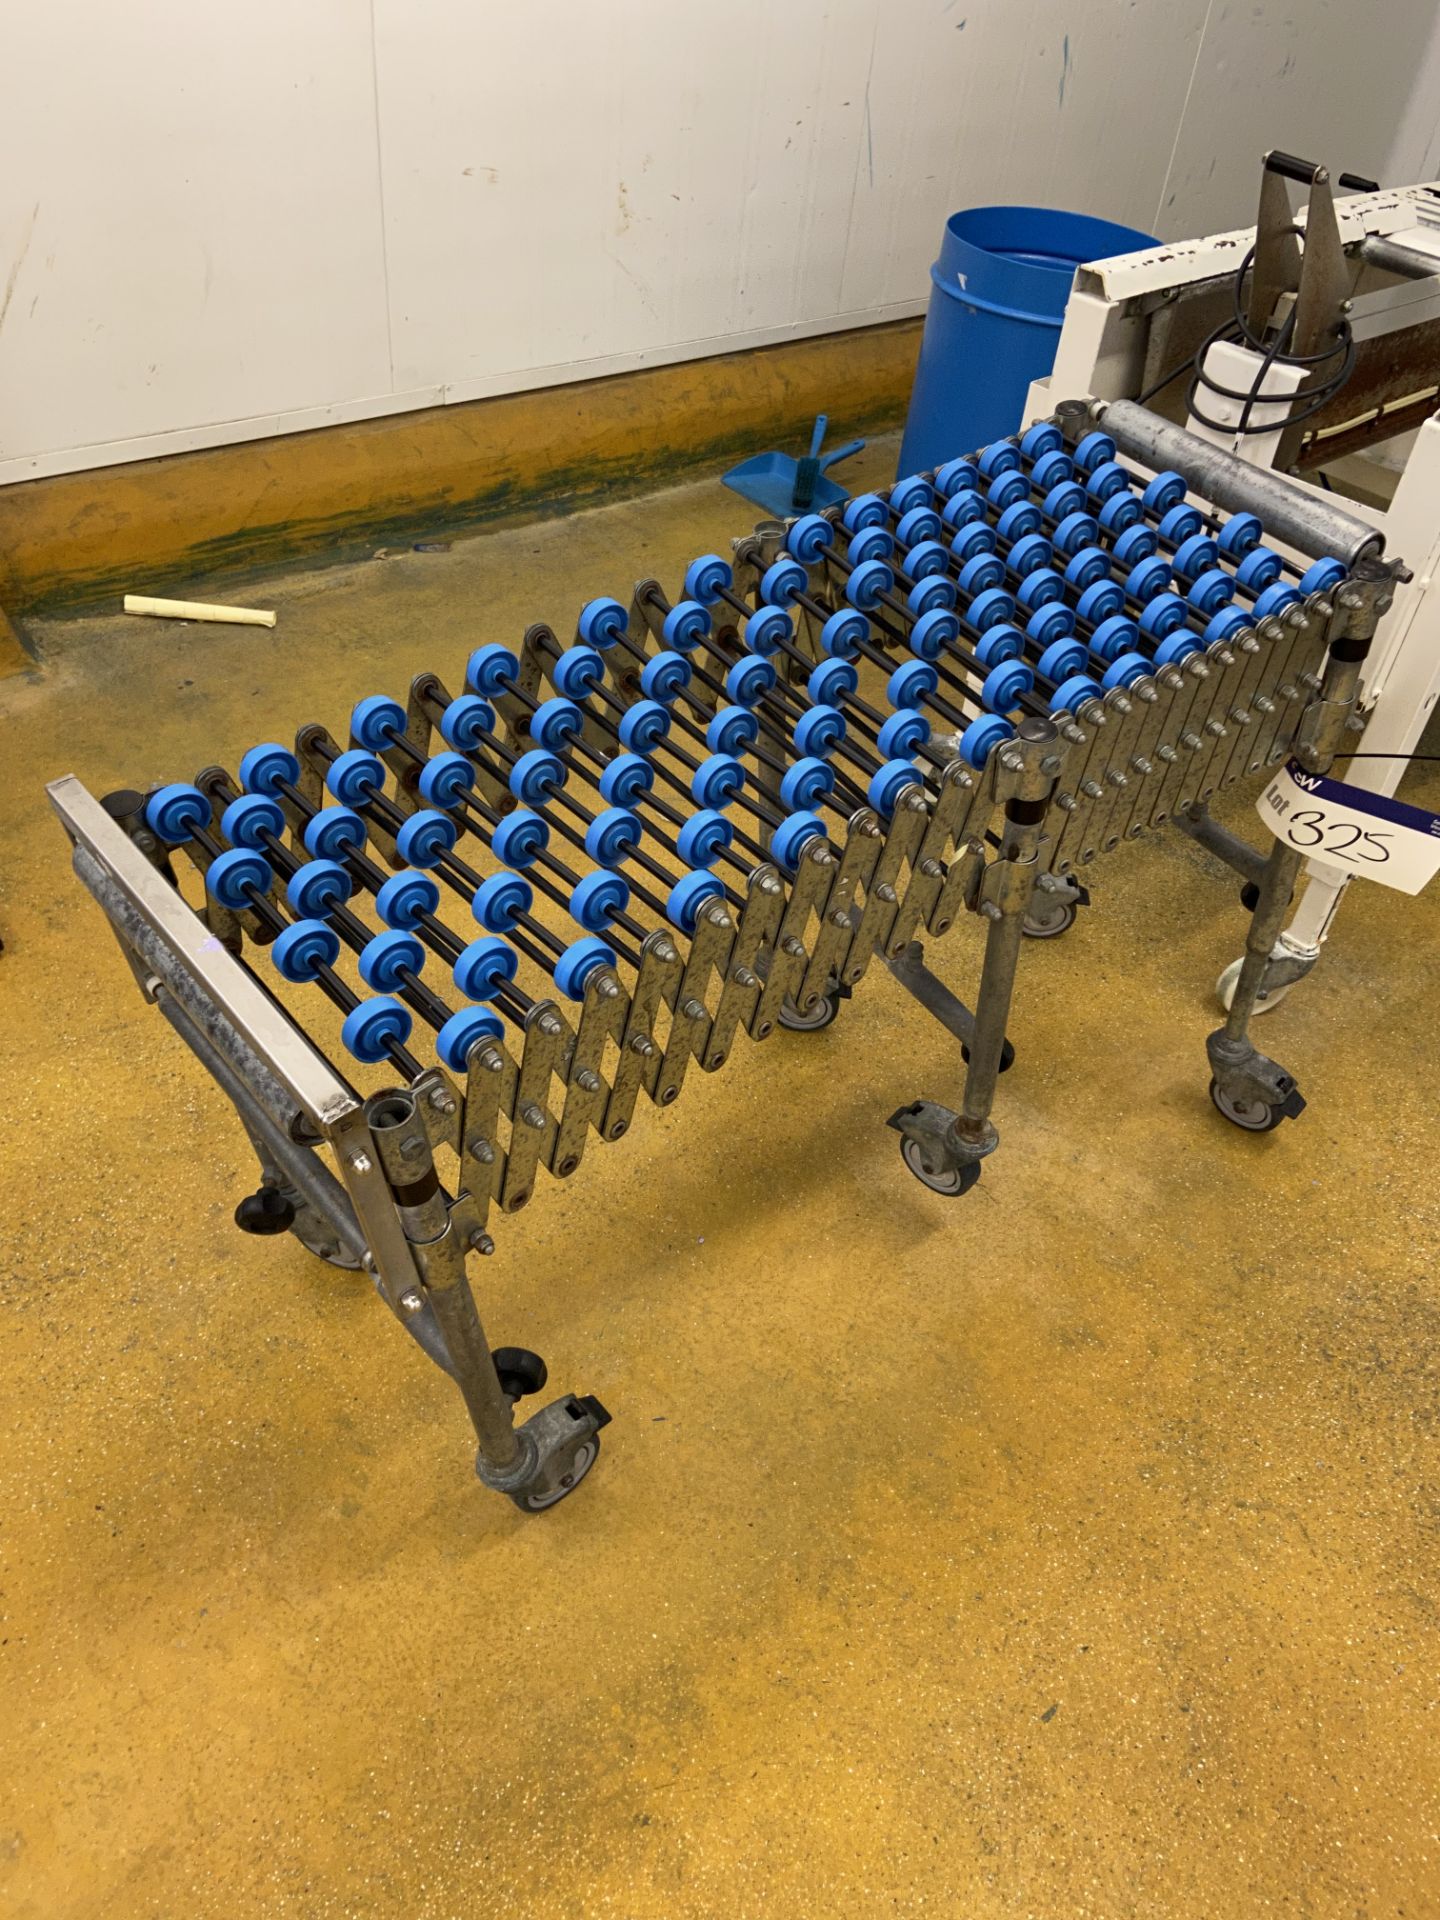 Extendable Roller Conveyor, approx. 400mm wide on rollsPlease read the following important